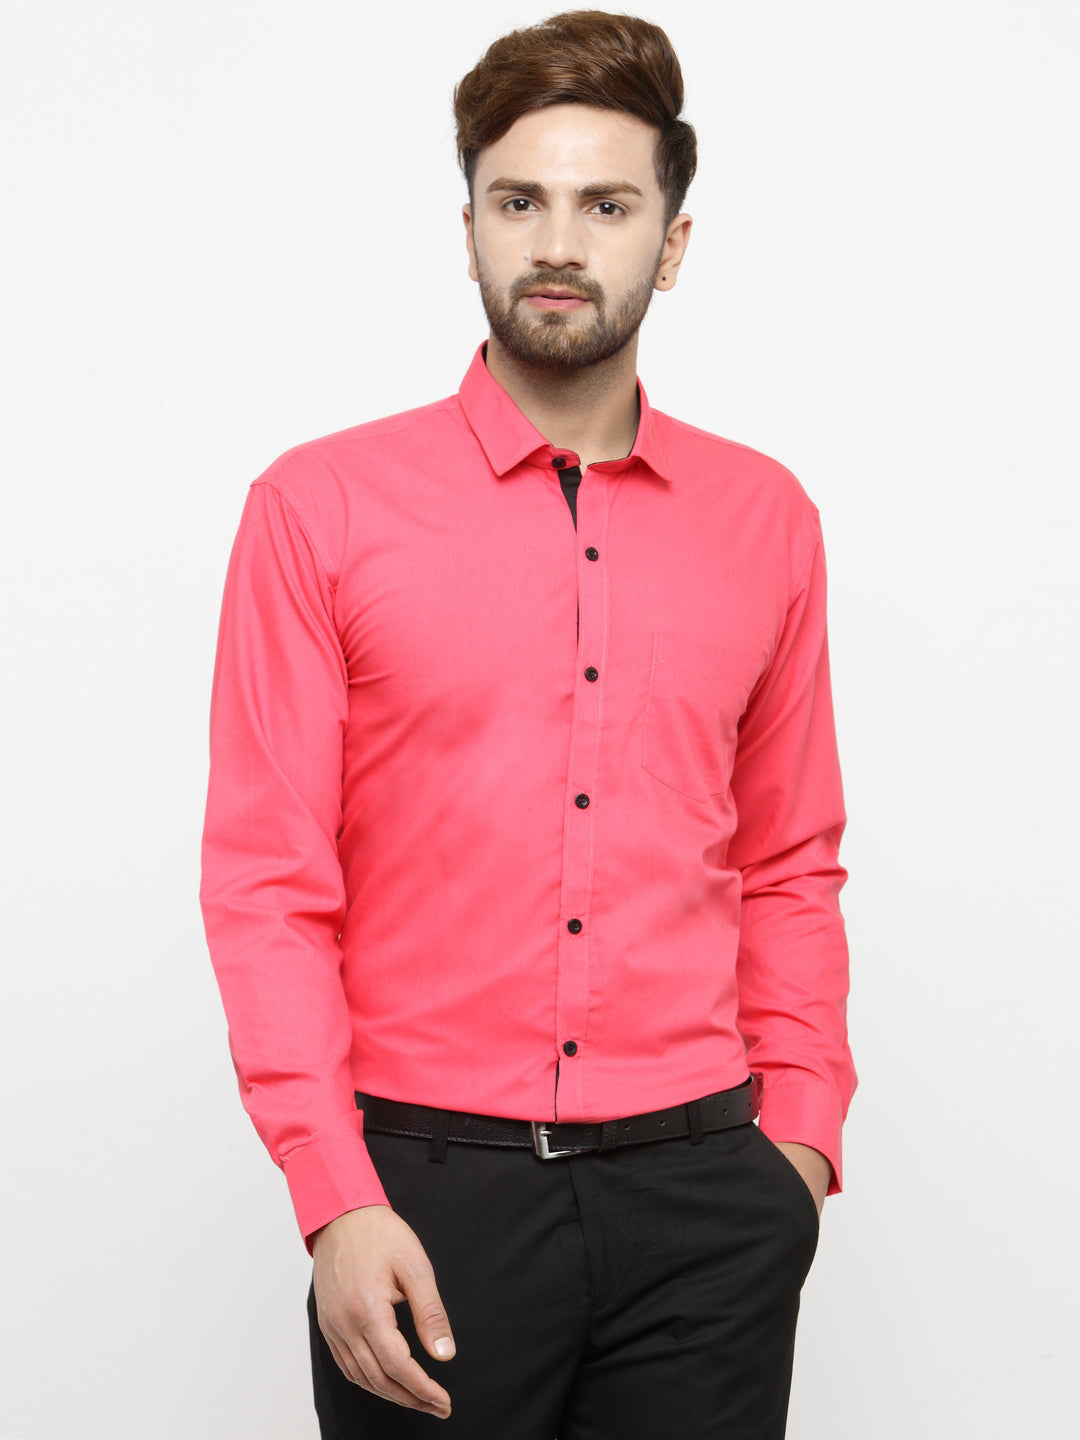 Men's Coral Red Formal Shirt with black detailing ( SF 411Coral ) - Jainish